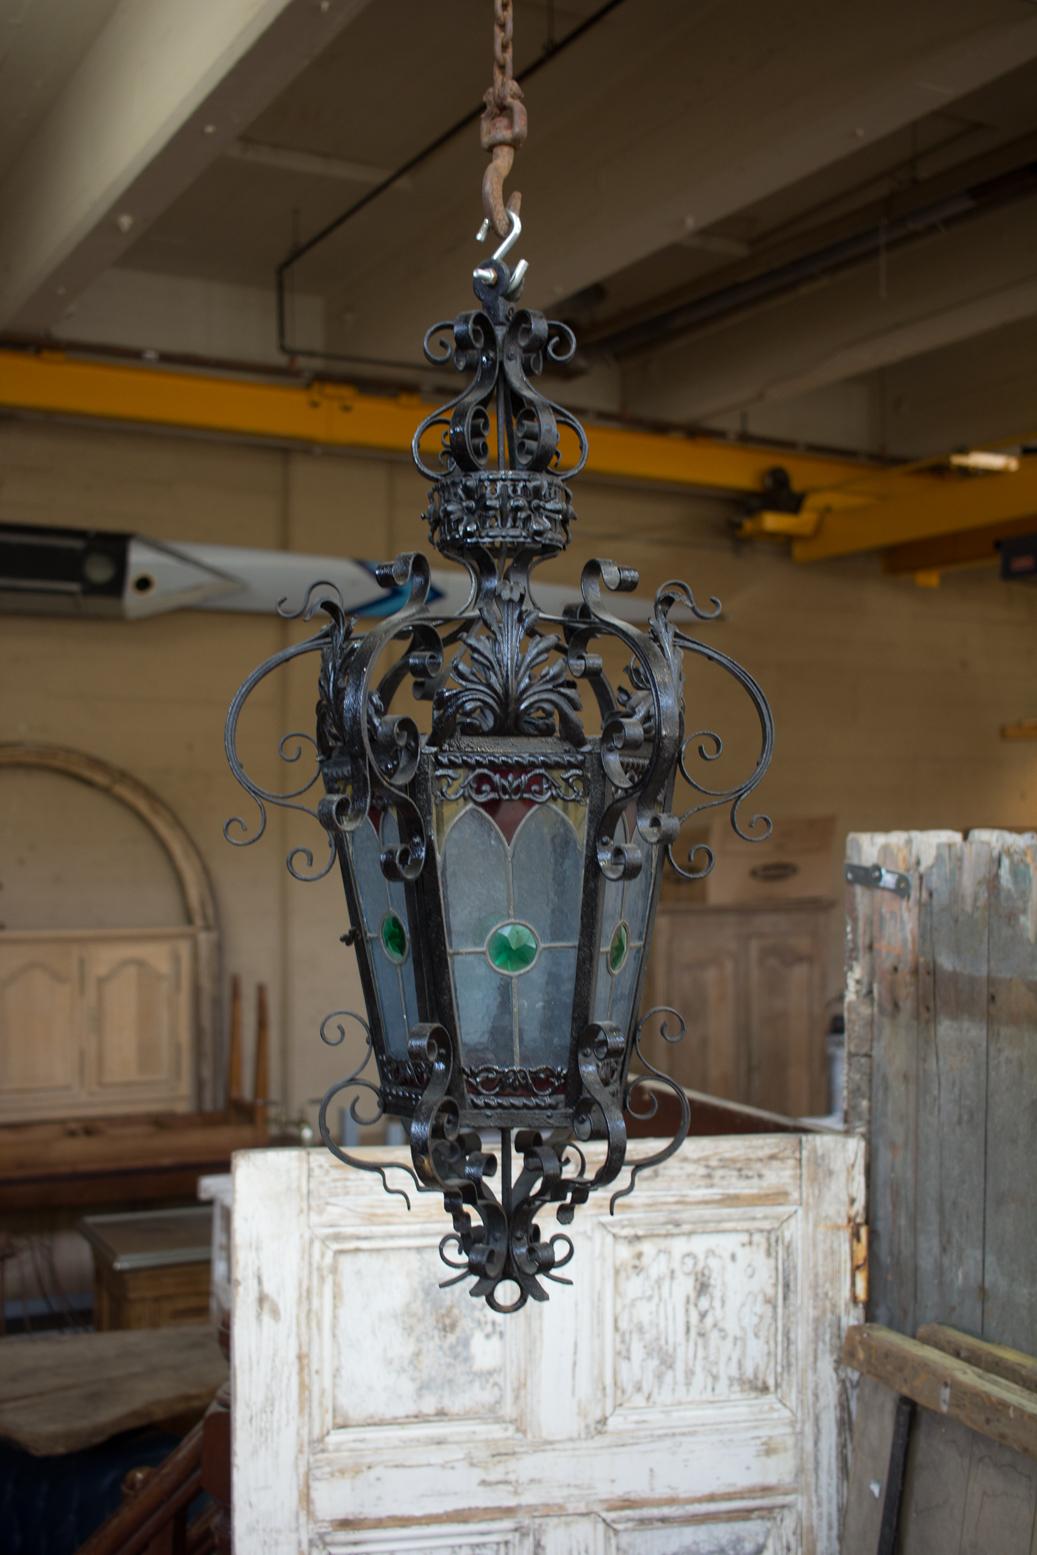 Antique French ornate wrought iron and stained glass lantern.